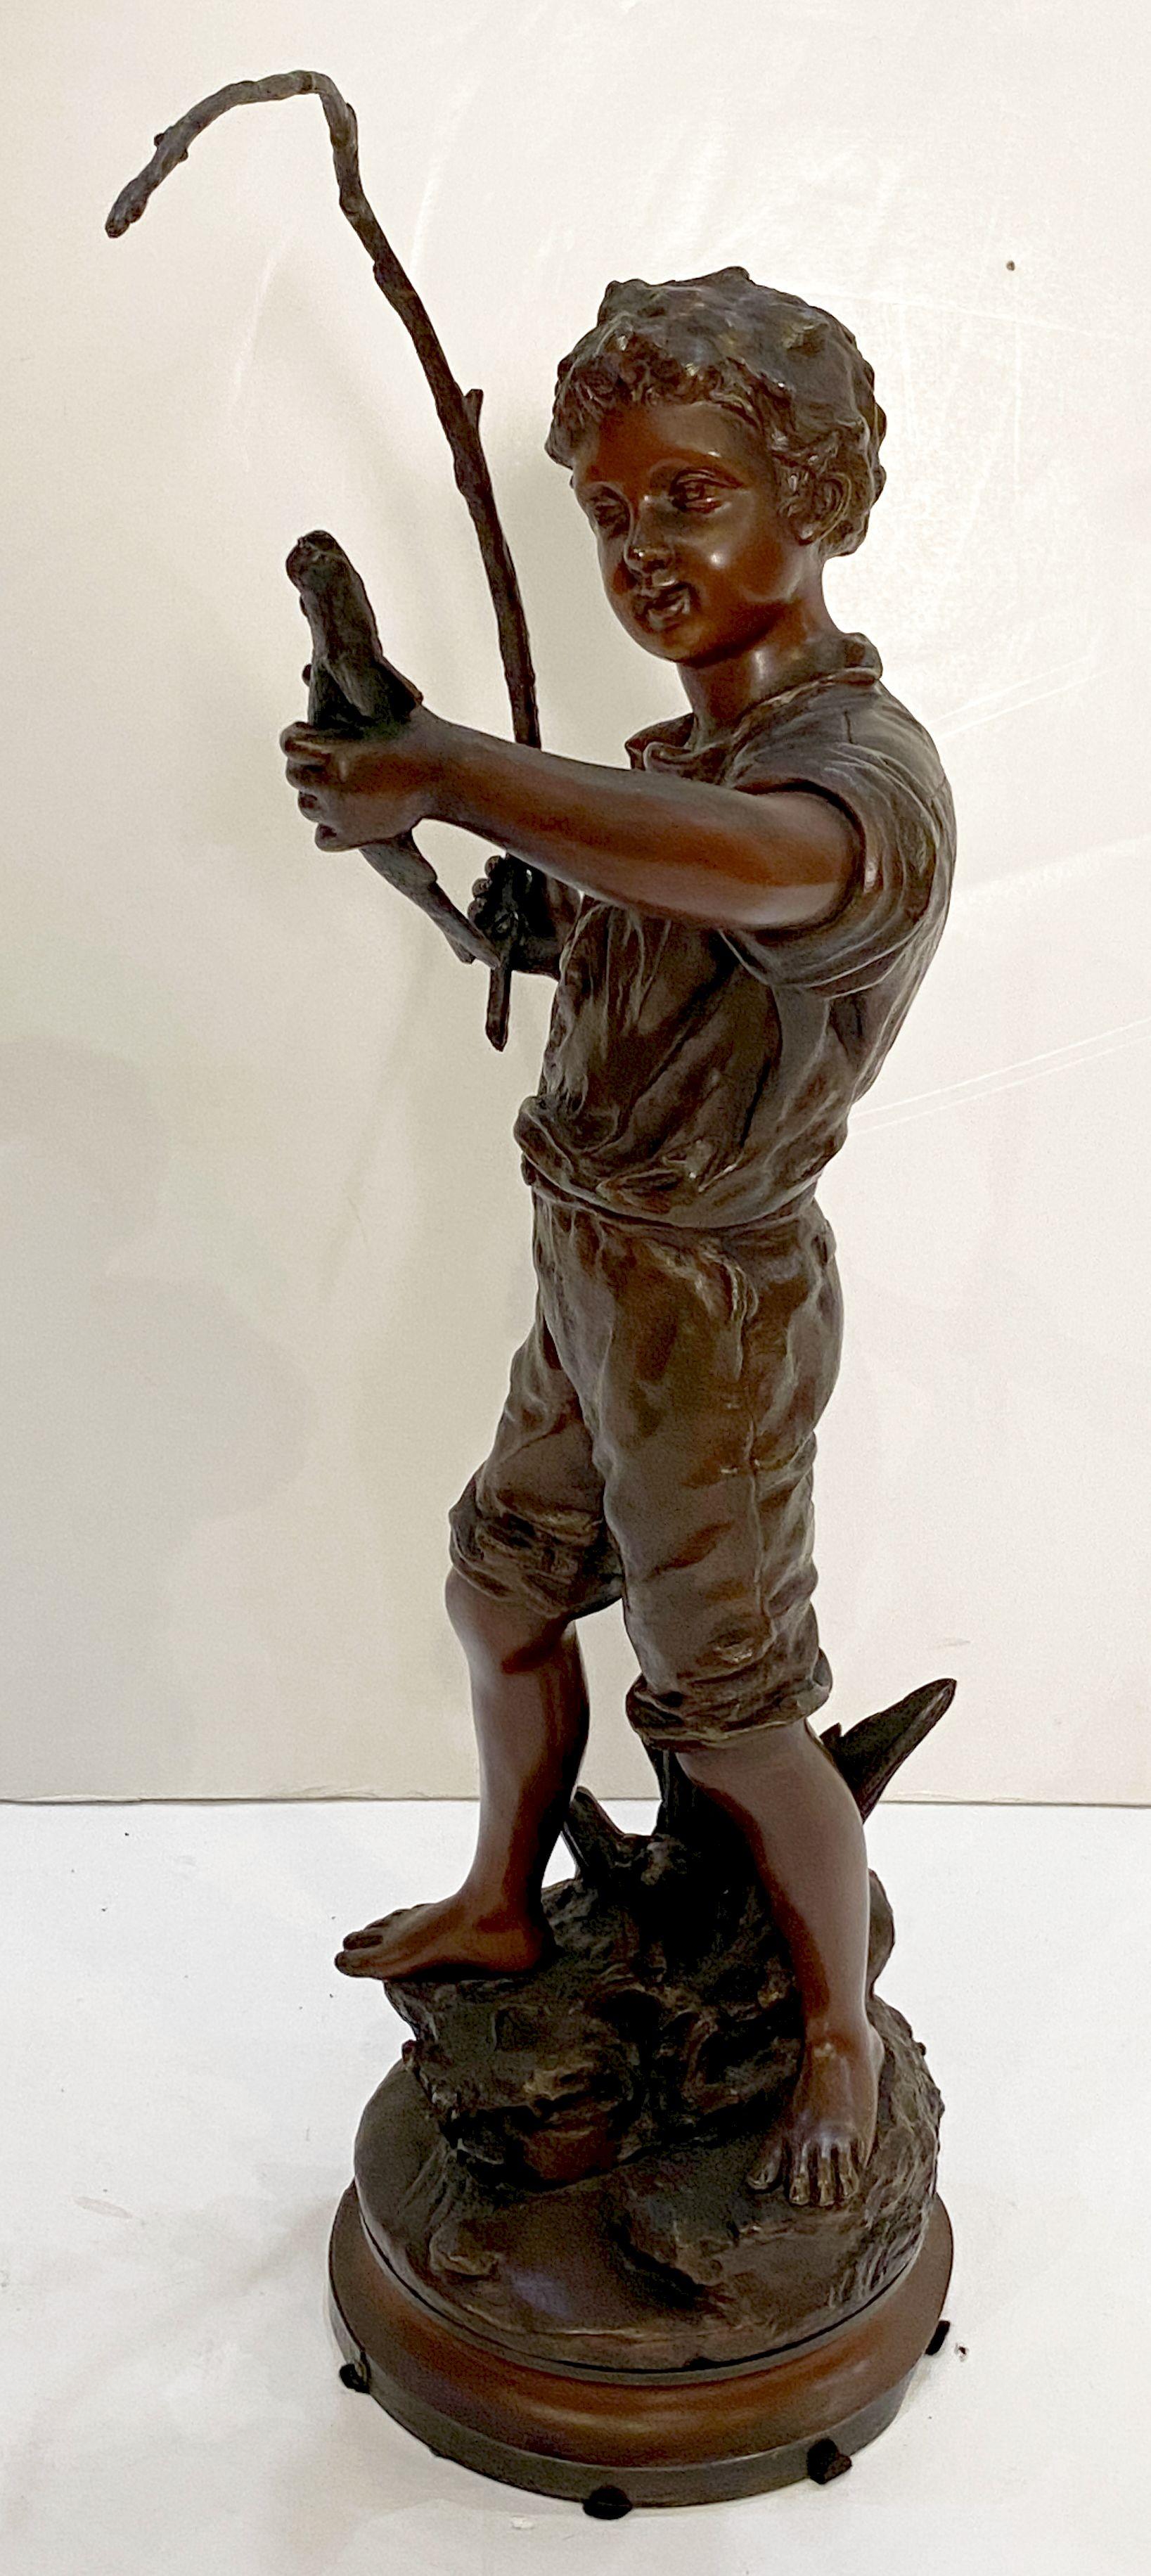 Heureux Pêcheur or Happy Fisherboy Bronze Sculptural Figure by Charles Anfrie  4